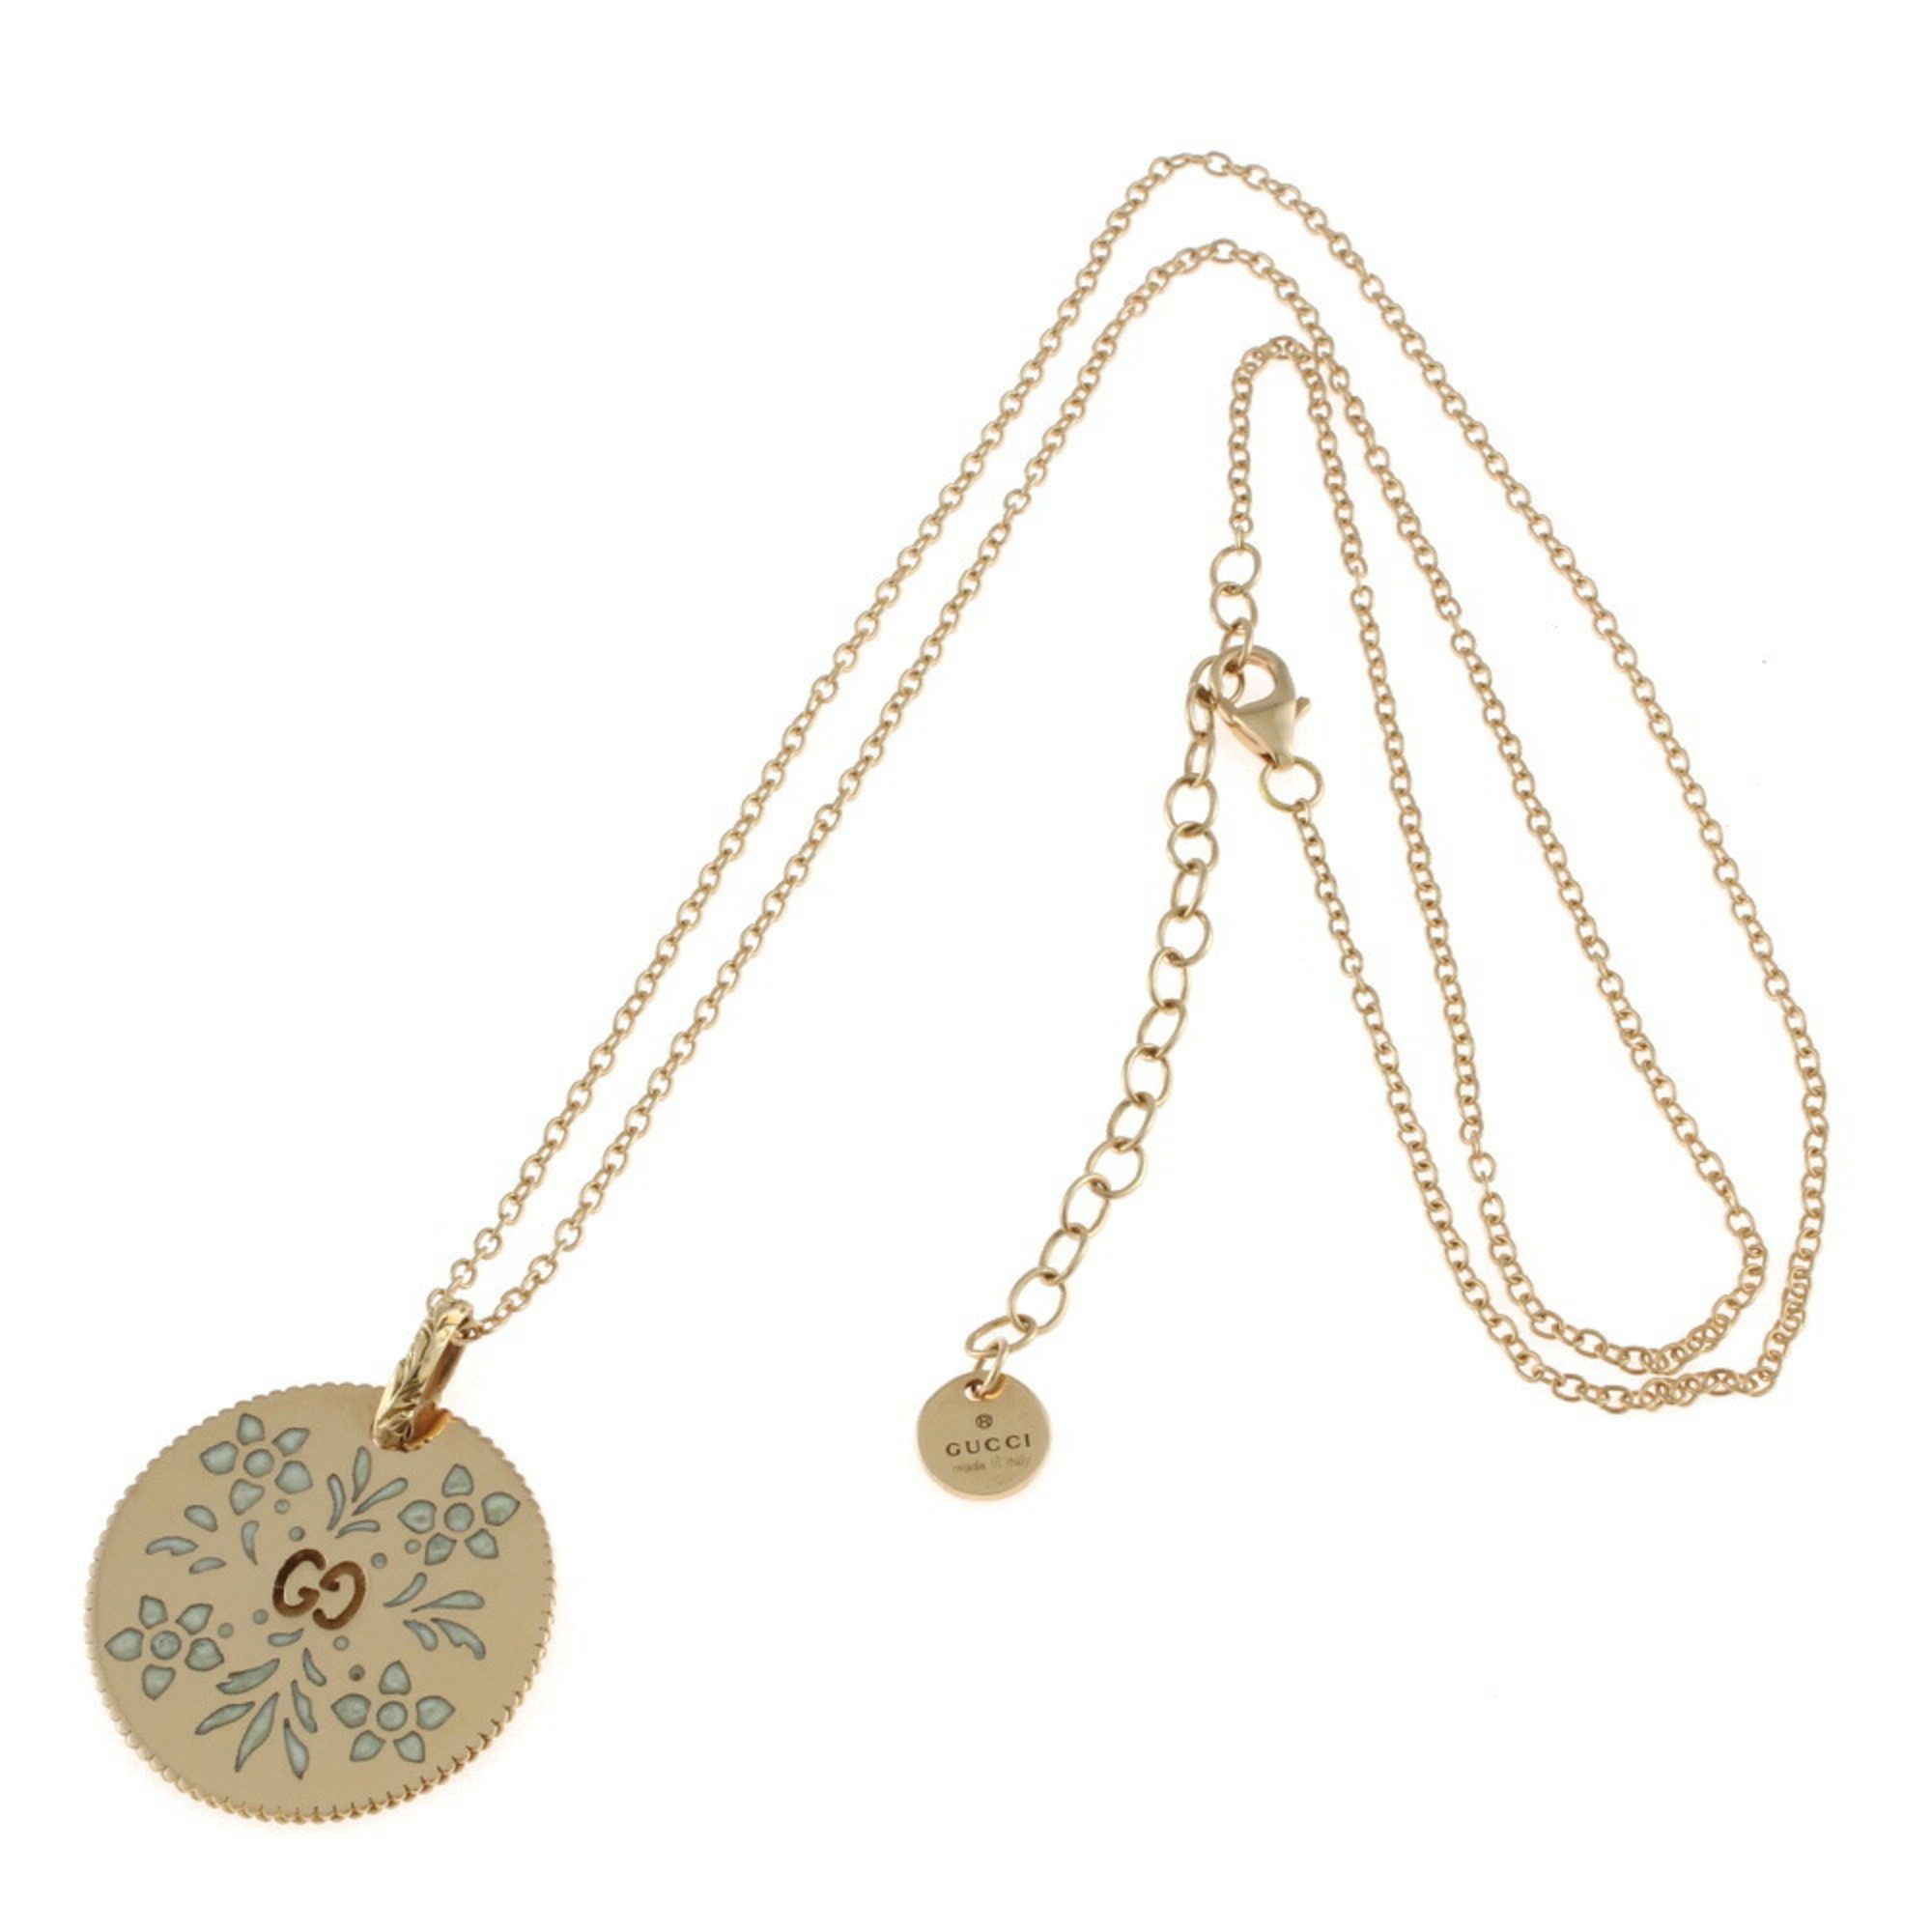 Gucci GUCCI Necklace 18K Gold Ladies